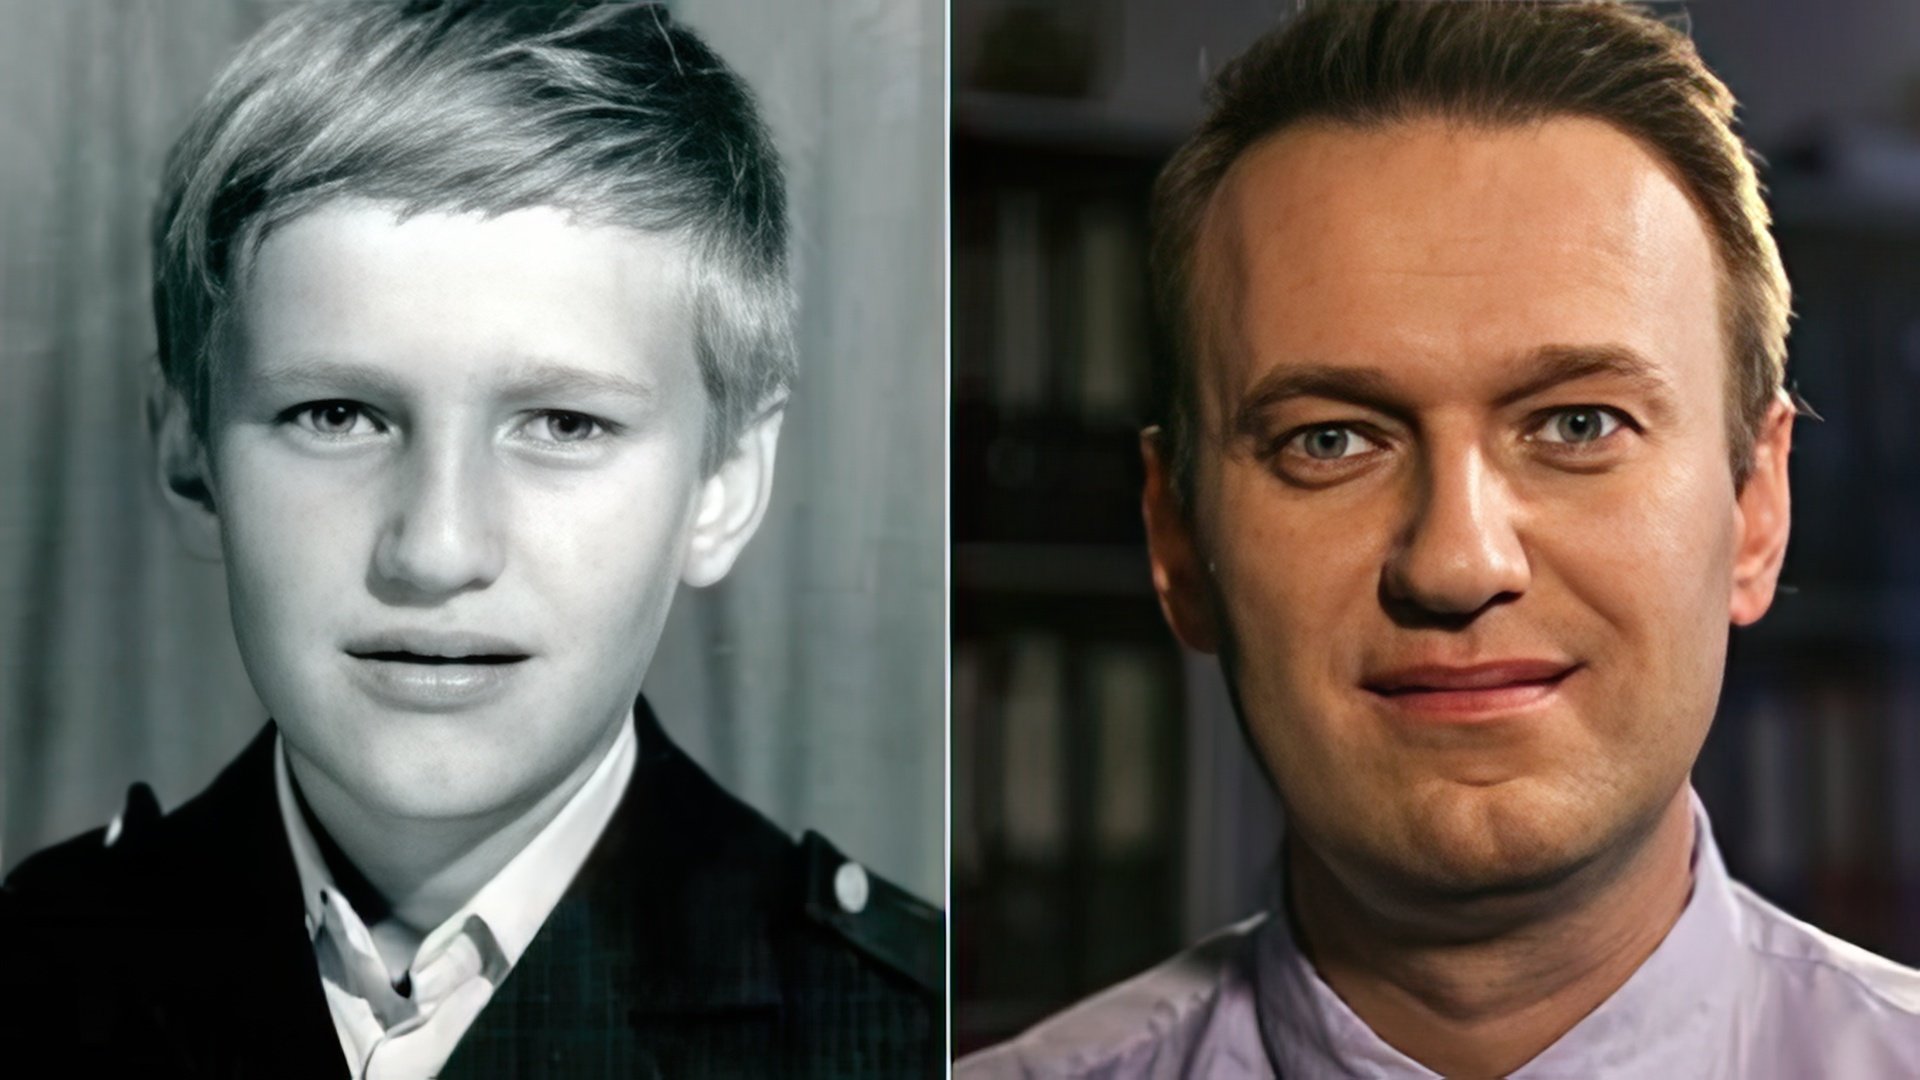 Alexei Navalny in childhood and nowadays